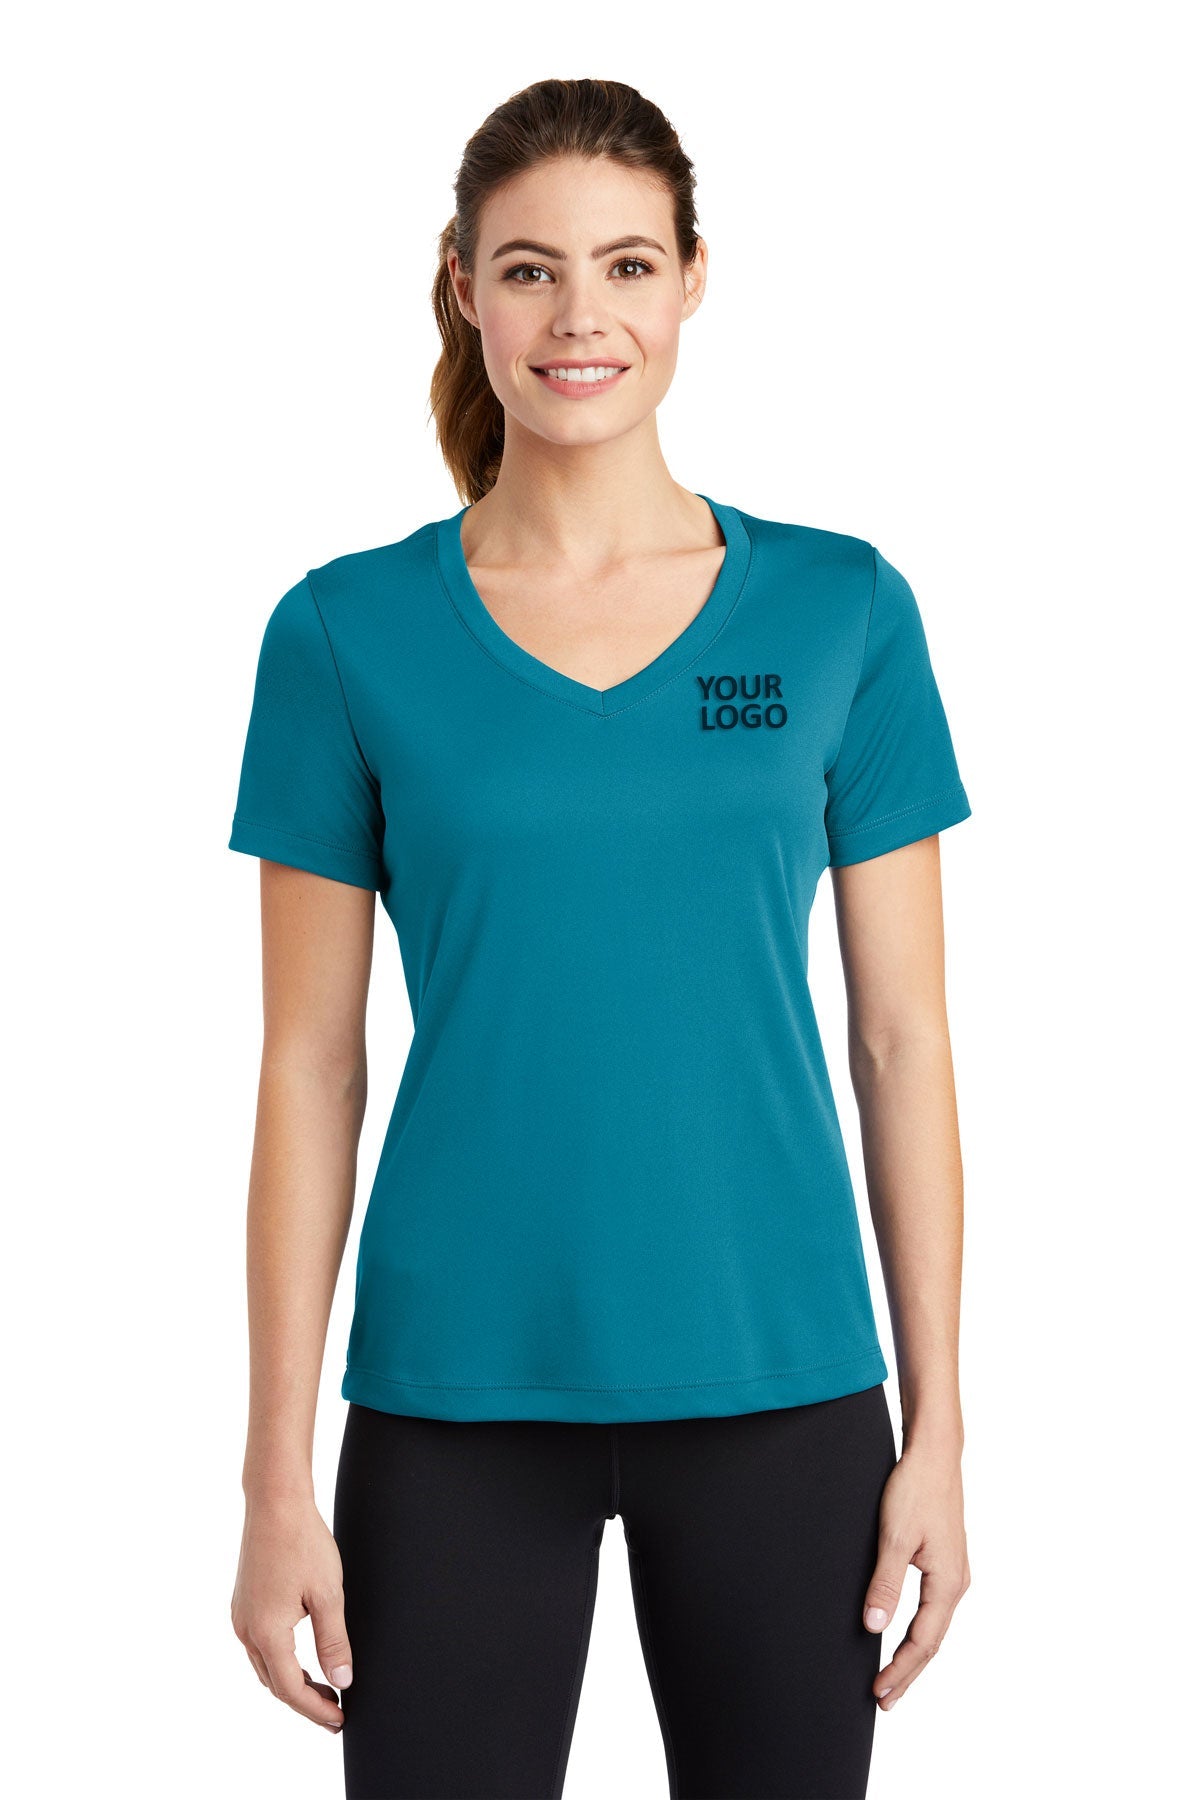 Sport-Tek Ladies PosiCharge Competitor Customized V-Neck Tee's, Tropic Blue